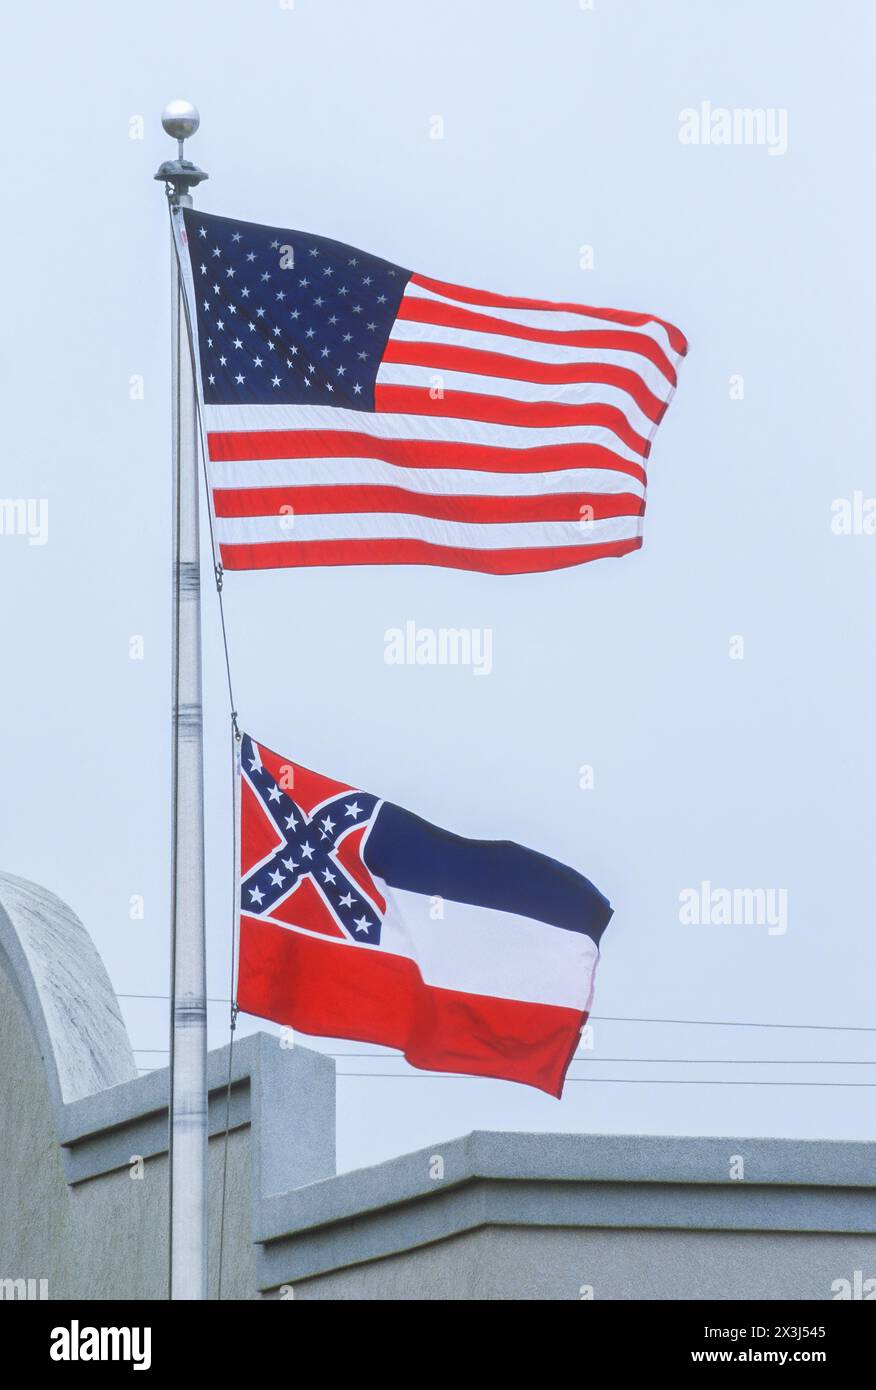 Flags of USA and Mississippi State, Tupelo, Mississippi.  On June 28, 2020 Mississippi Legislature voted to replace this flag with a new design. Stock Photo